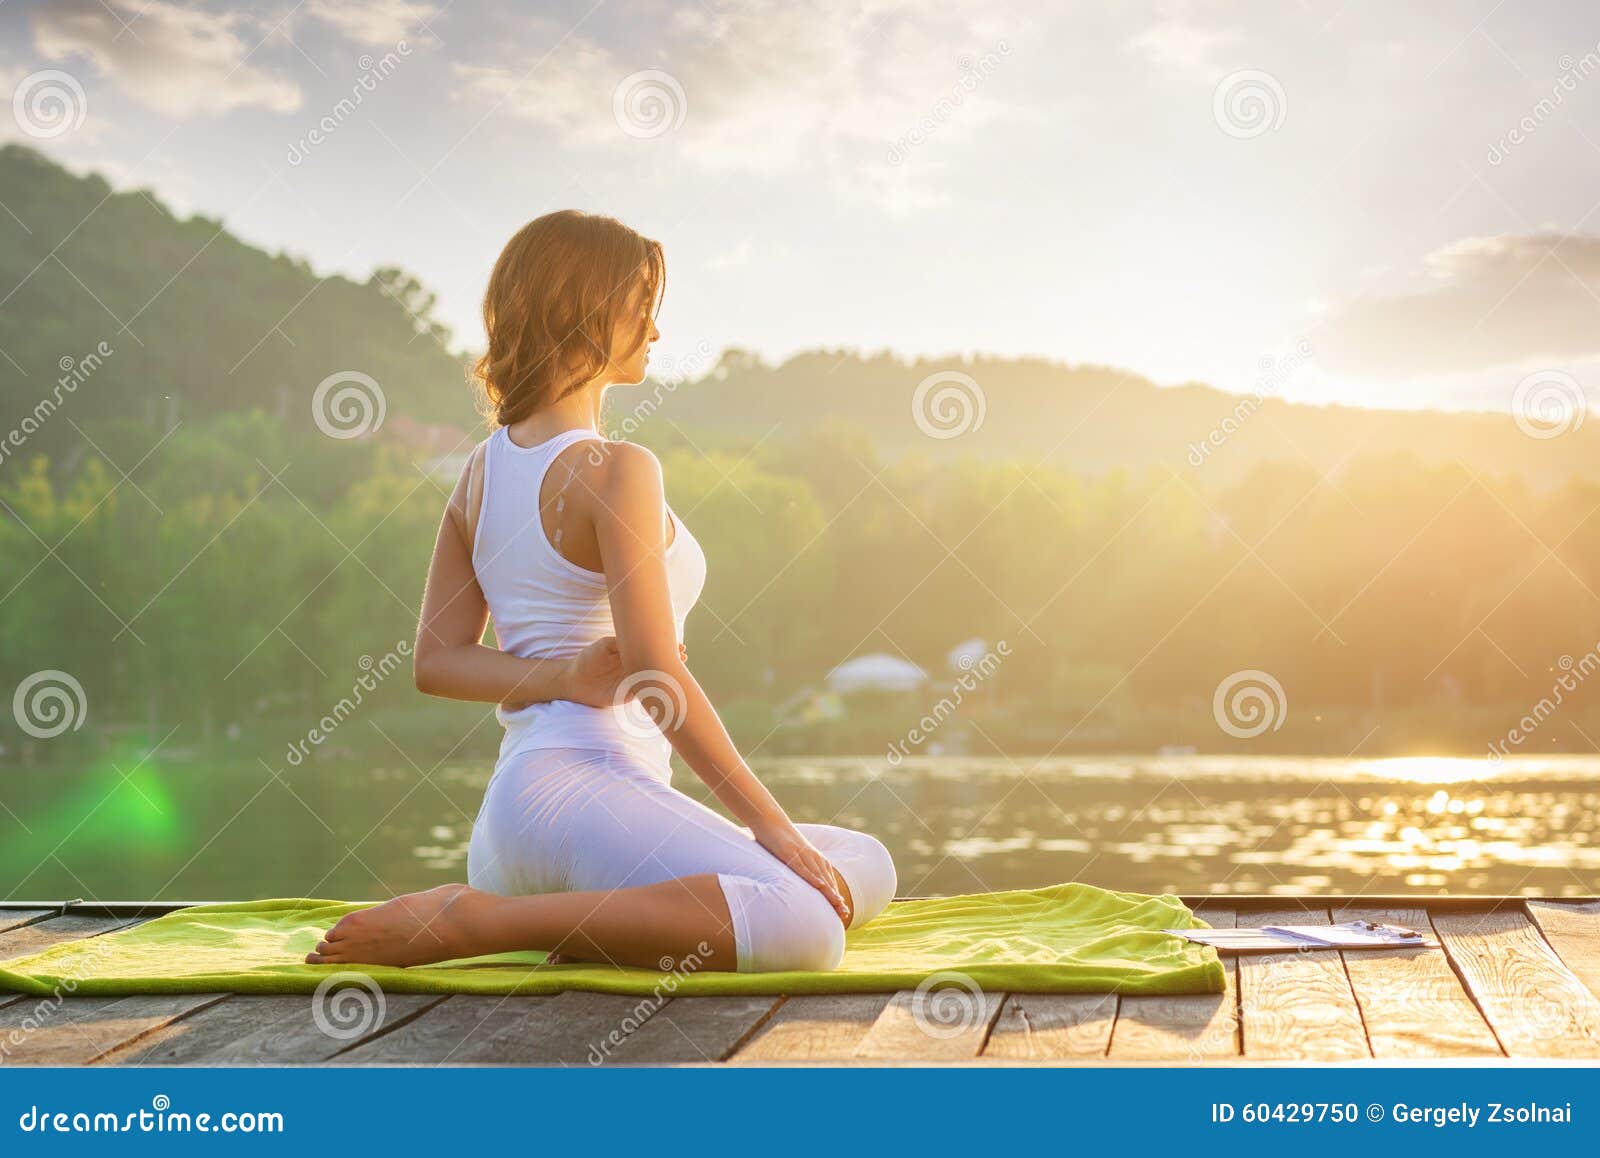 woman yoga - relax in nature